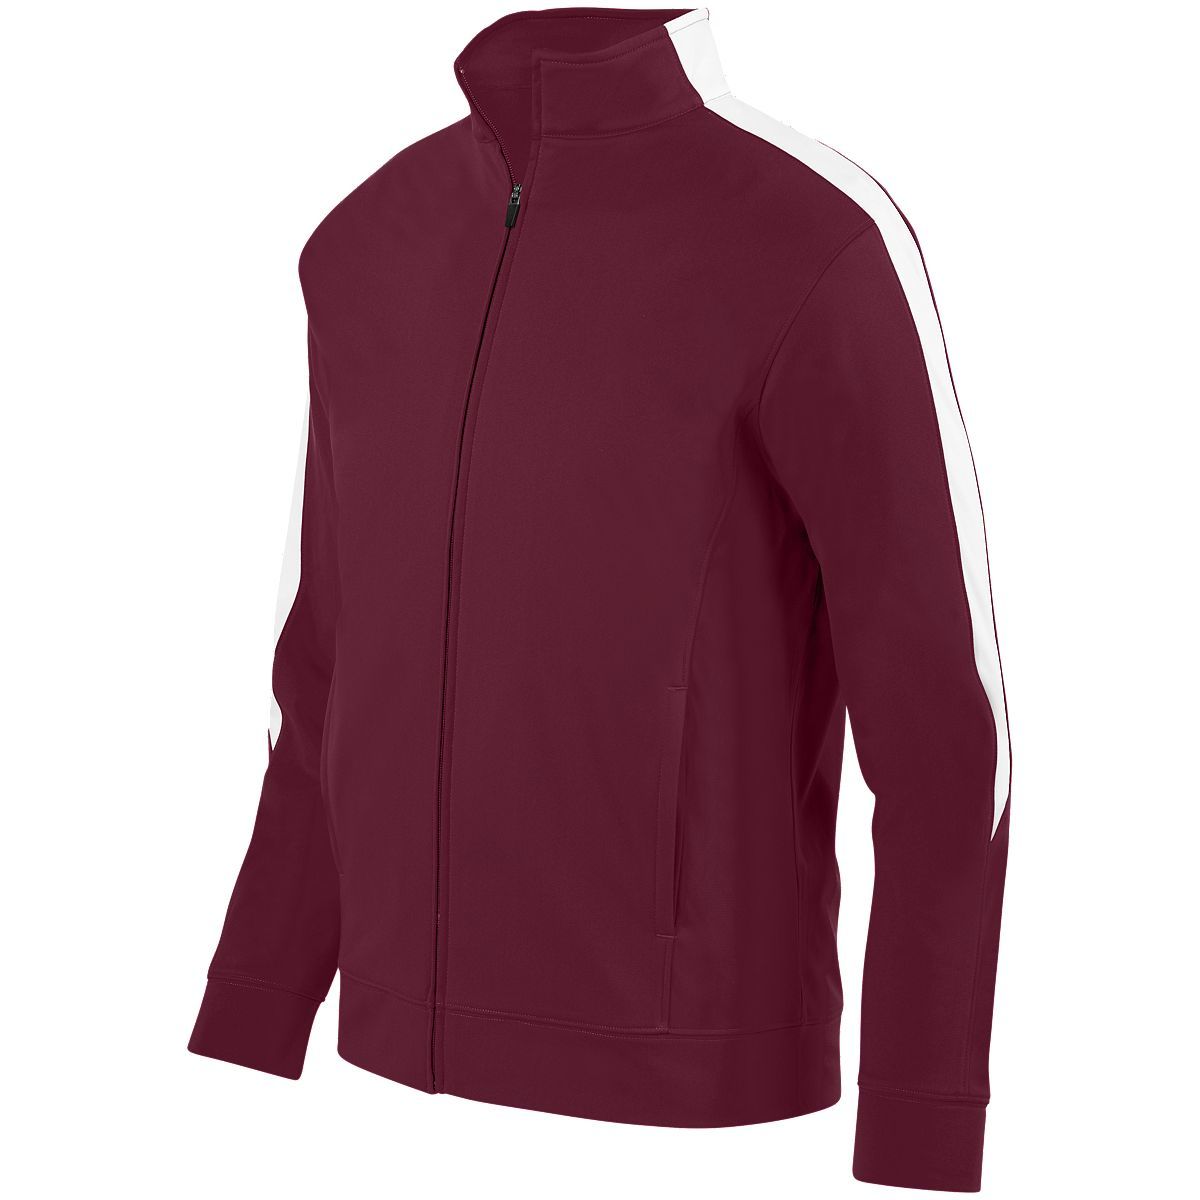 Augusta Sportswear Youth Medalist Jacket 2.0 in Maroon/White  -Part of the Youth, Youth-Jacket, Augusta-Products, Outerwear product lines at KanaleyCreations.com